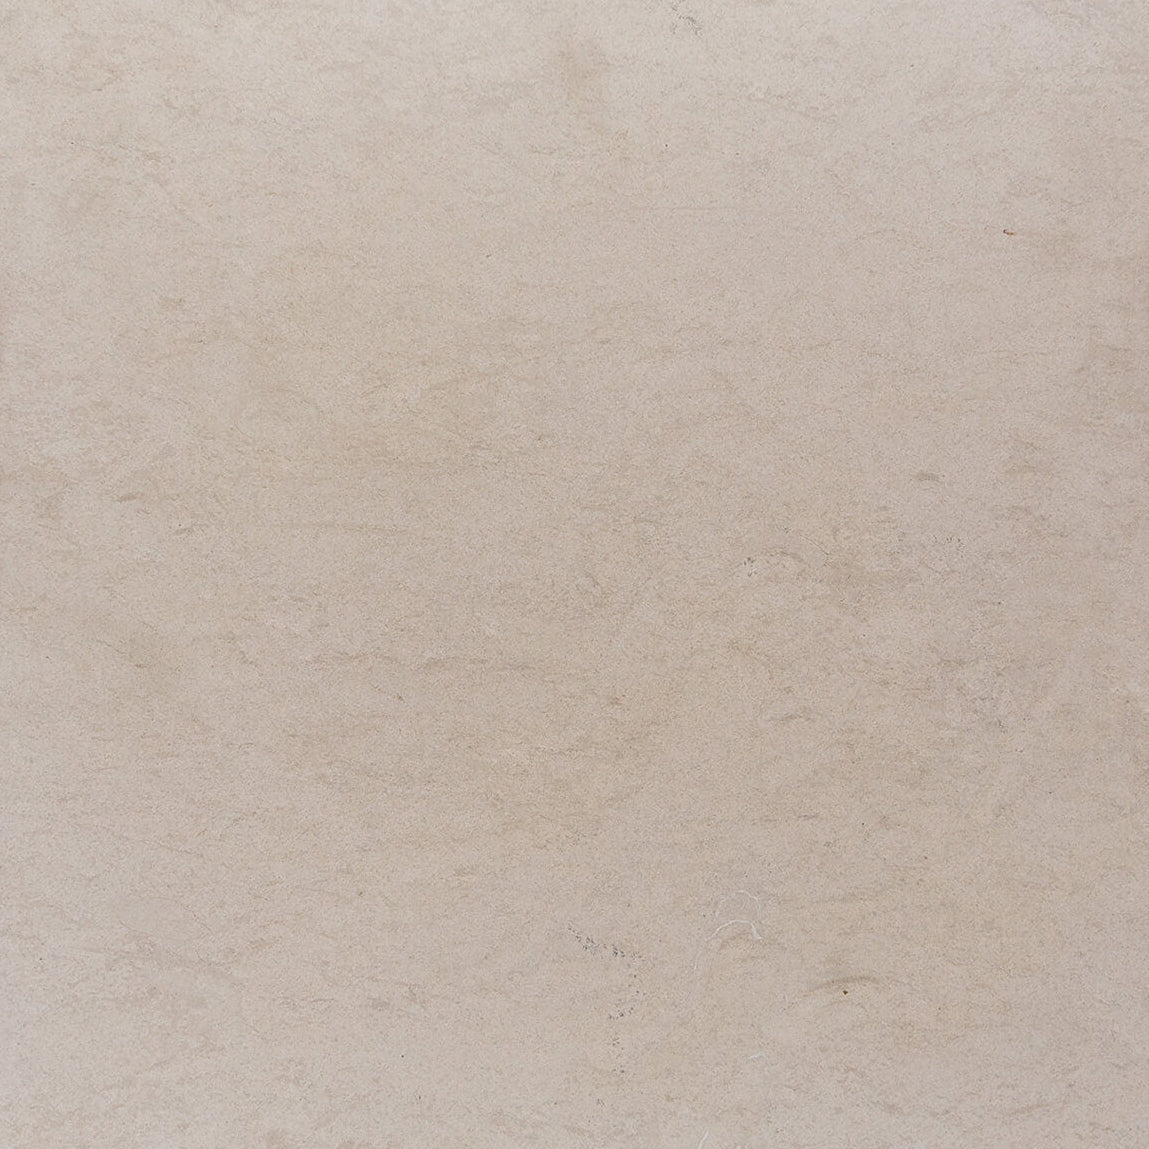 saint francis limestone brown stone tile  sold by surface group